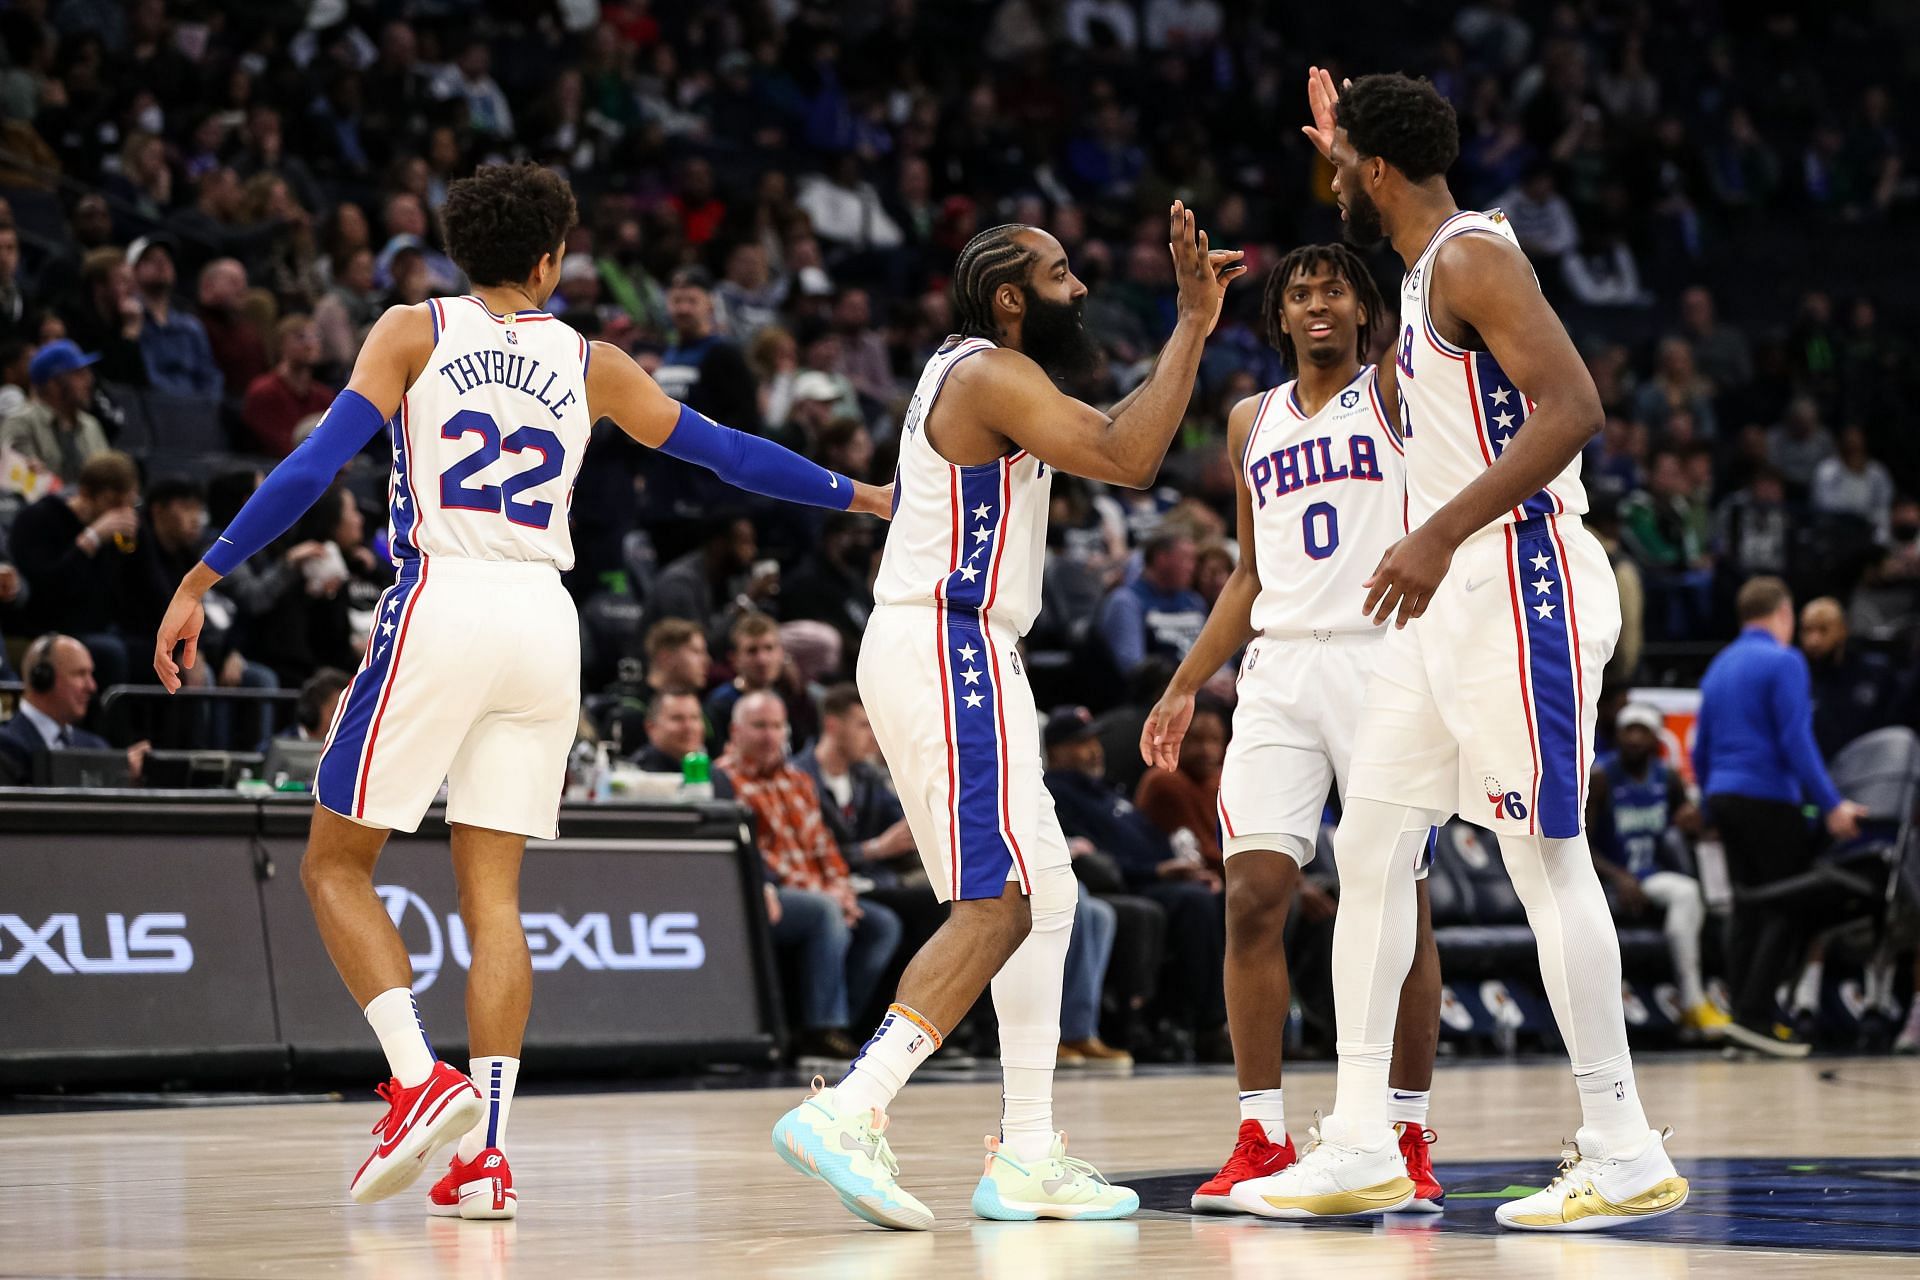 Enter caption Enter caption Matisse Thybulle, James Harden (second from left), Tyrese Maxey (0), and Joel Embiid (right) of the Philadelphia 76ers high five during a time out against the Minnesota Timberwolves on Feb. 25 in Minneapolis, Minnesota. The 76ers defeated the Timberwolves 133-102.